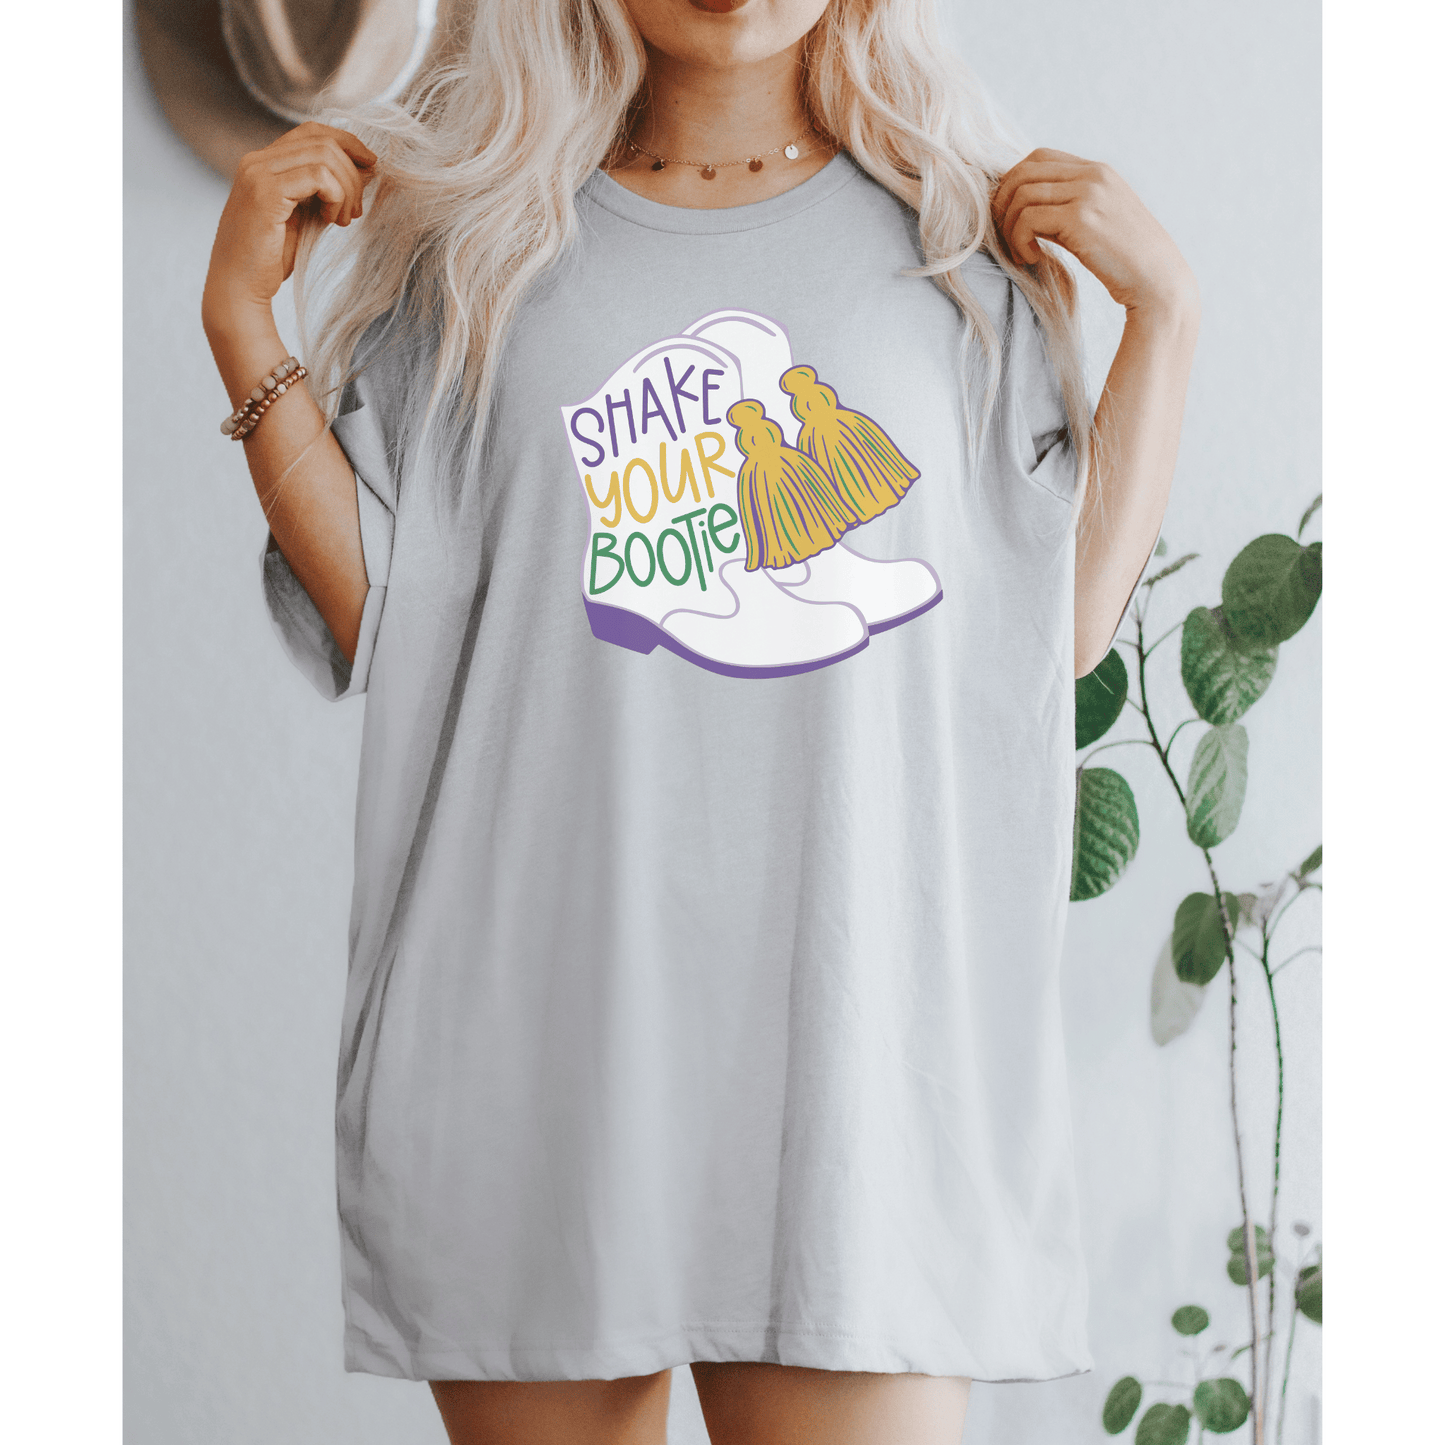 Oversized mardi gras shirt in silver with funny mardi gras design shake your bootie